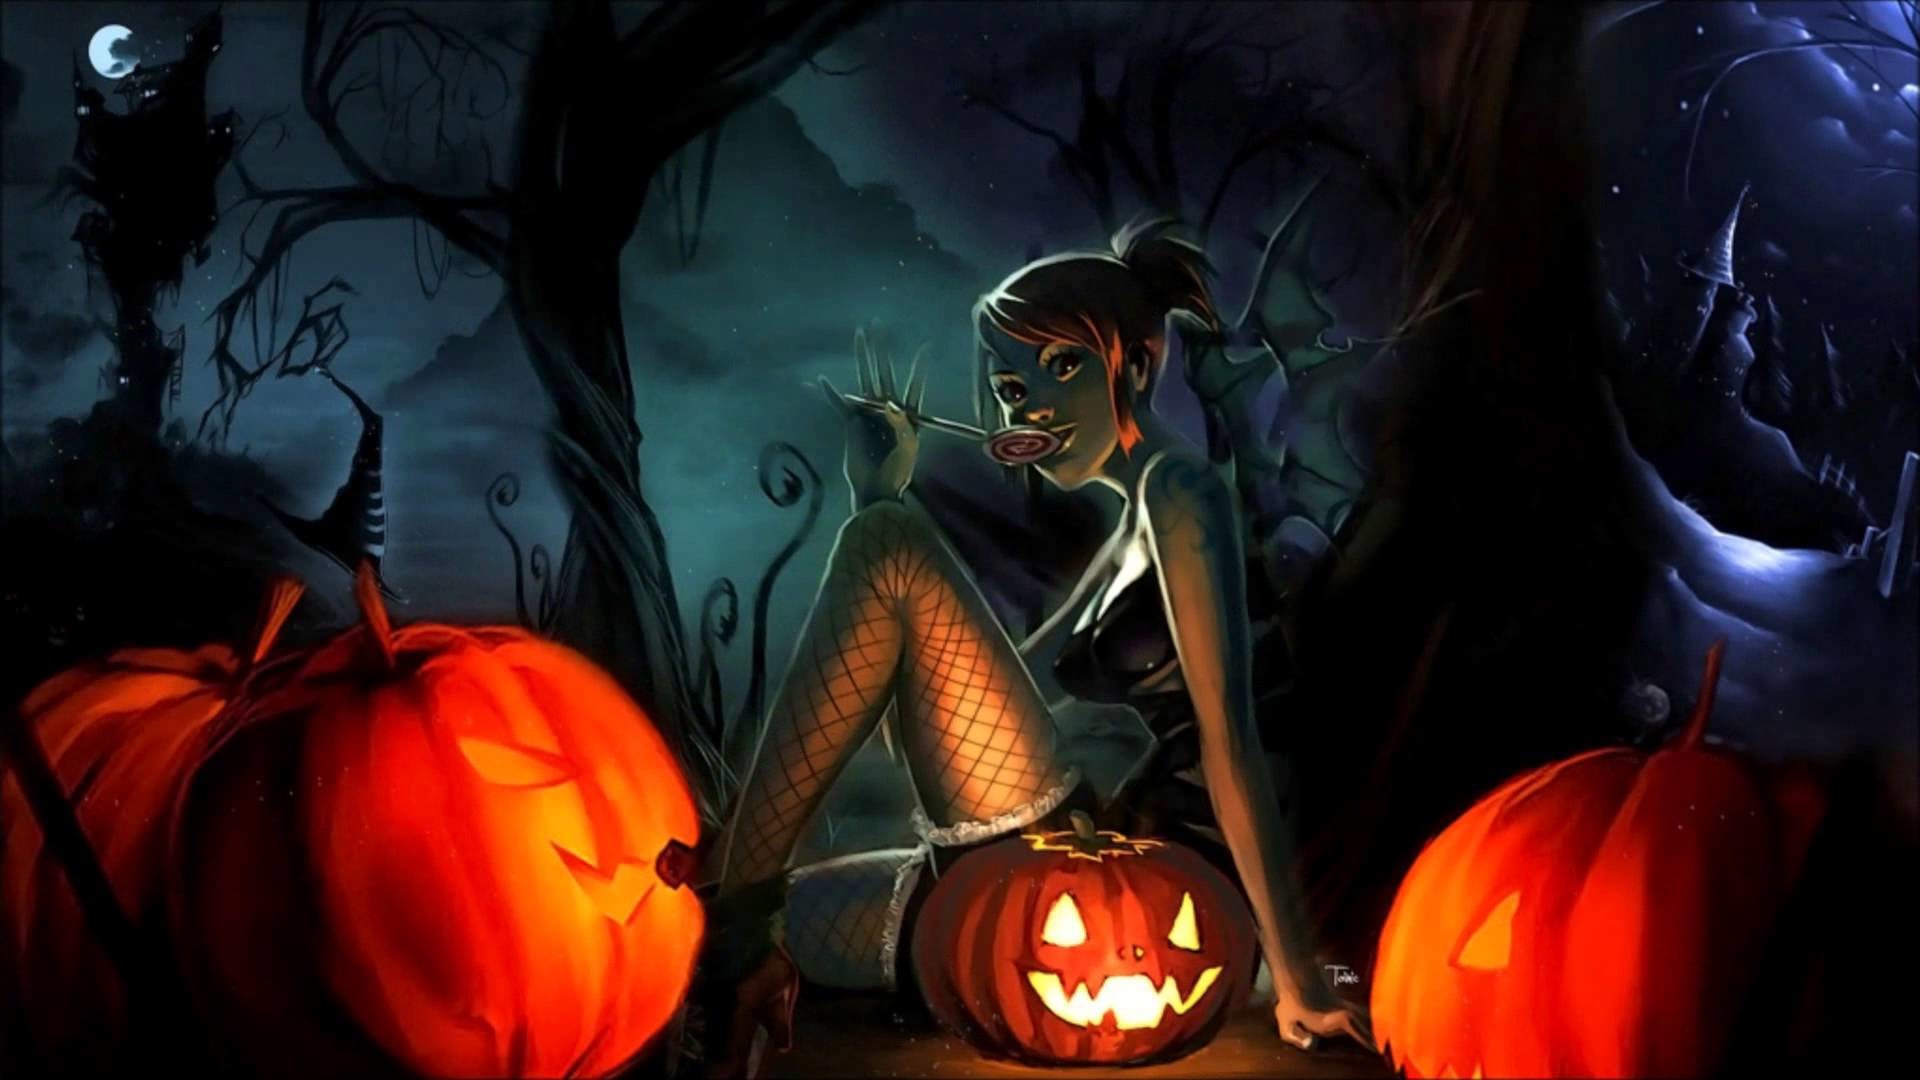 1920x1080 Scary Halloween Picture Free.